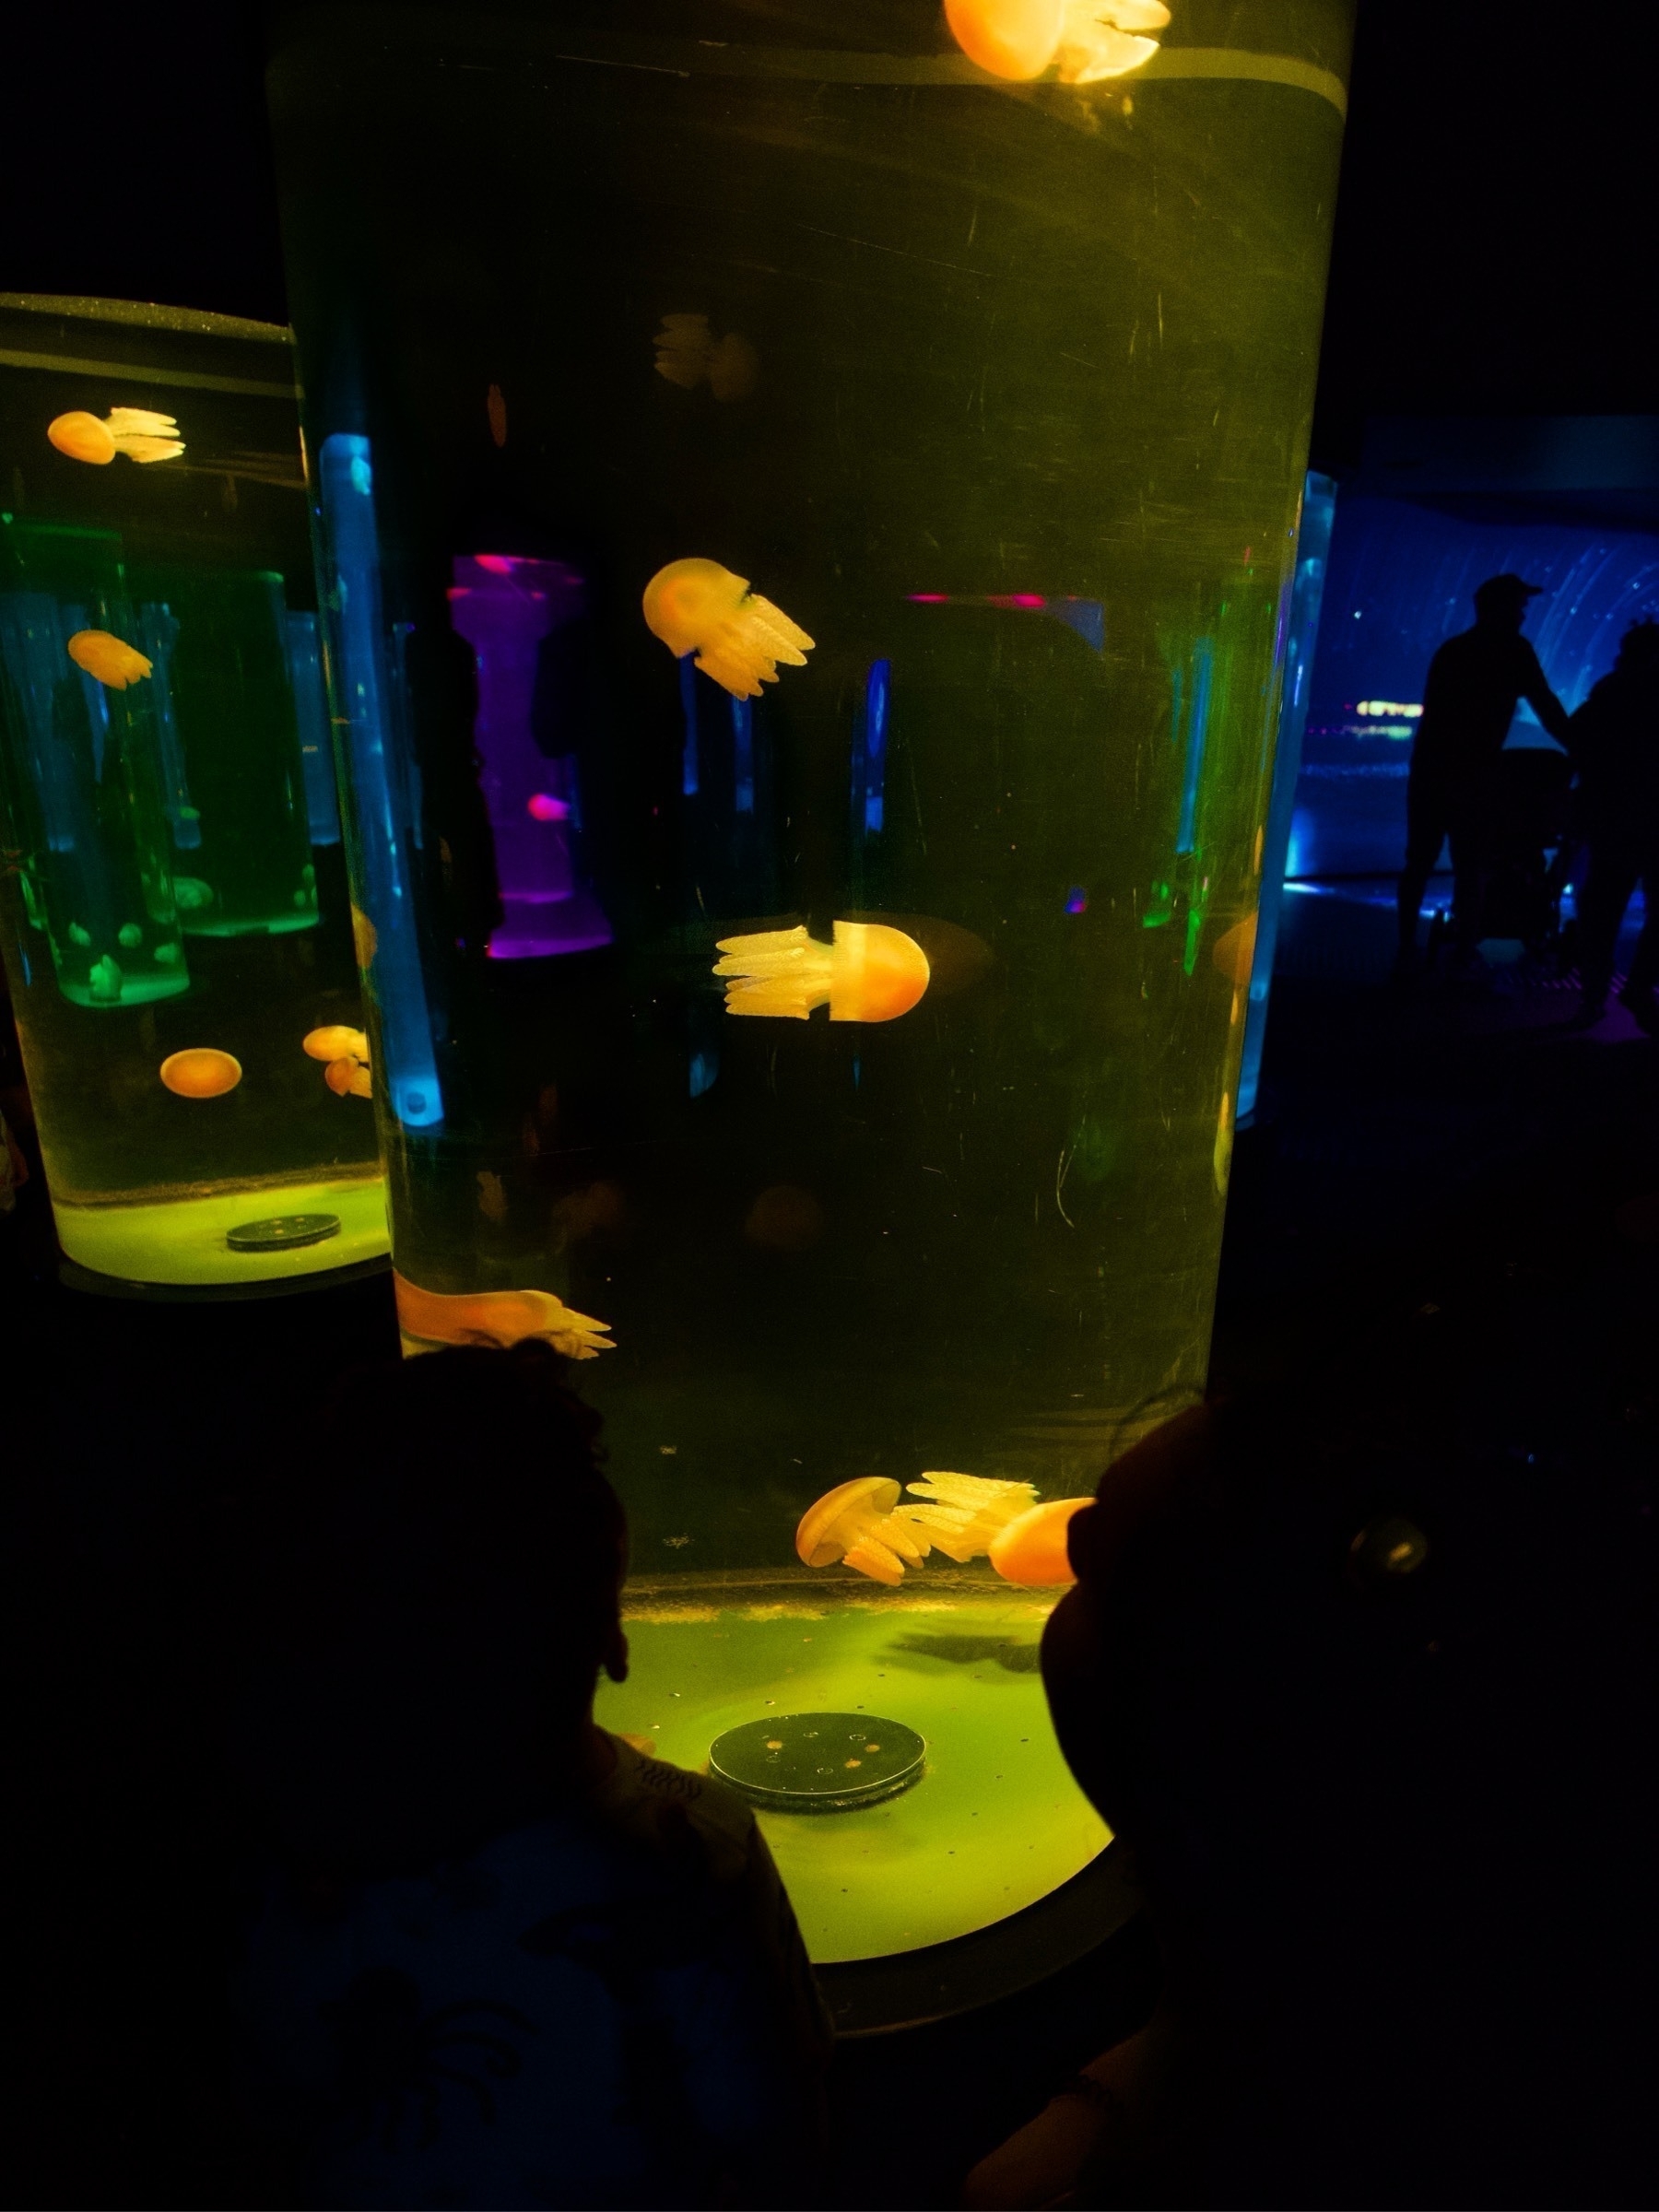 Silhouettes of people from behind as they look at a tank of illuminated jellyfish